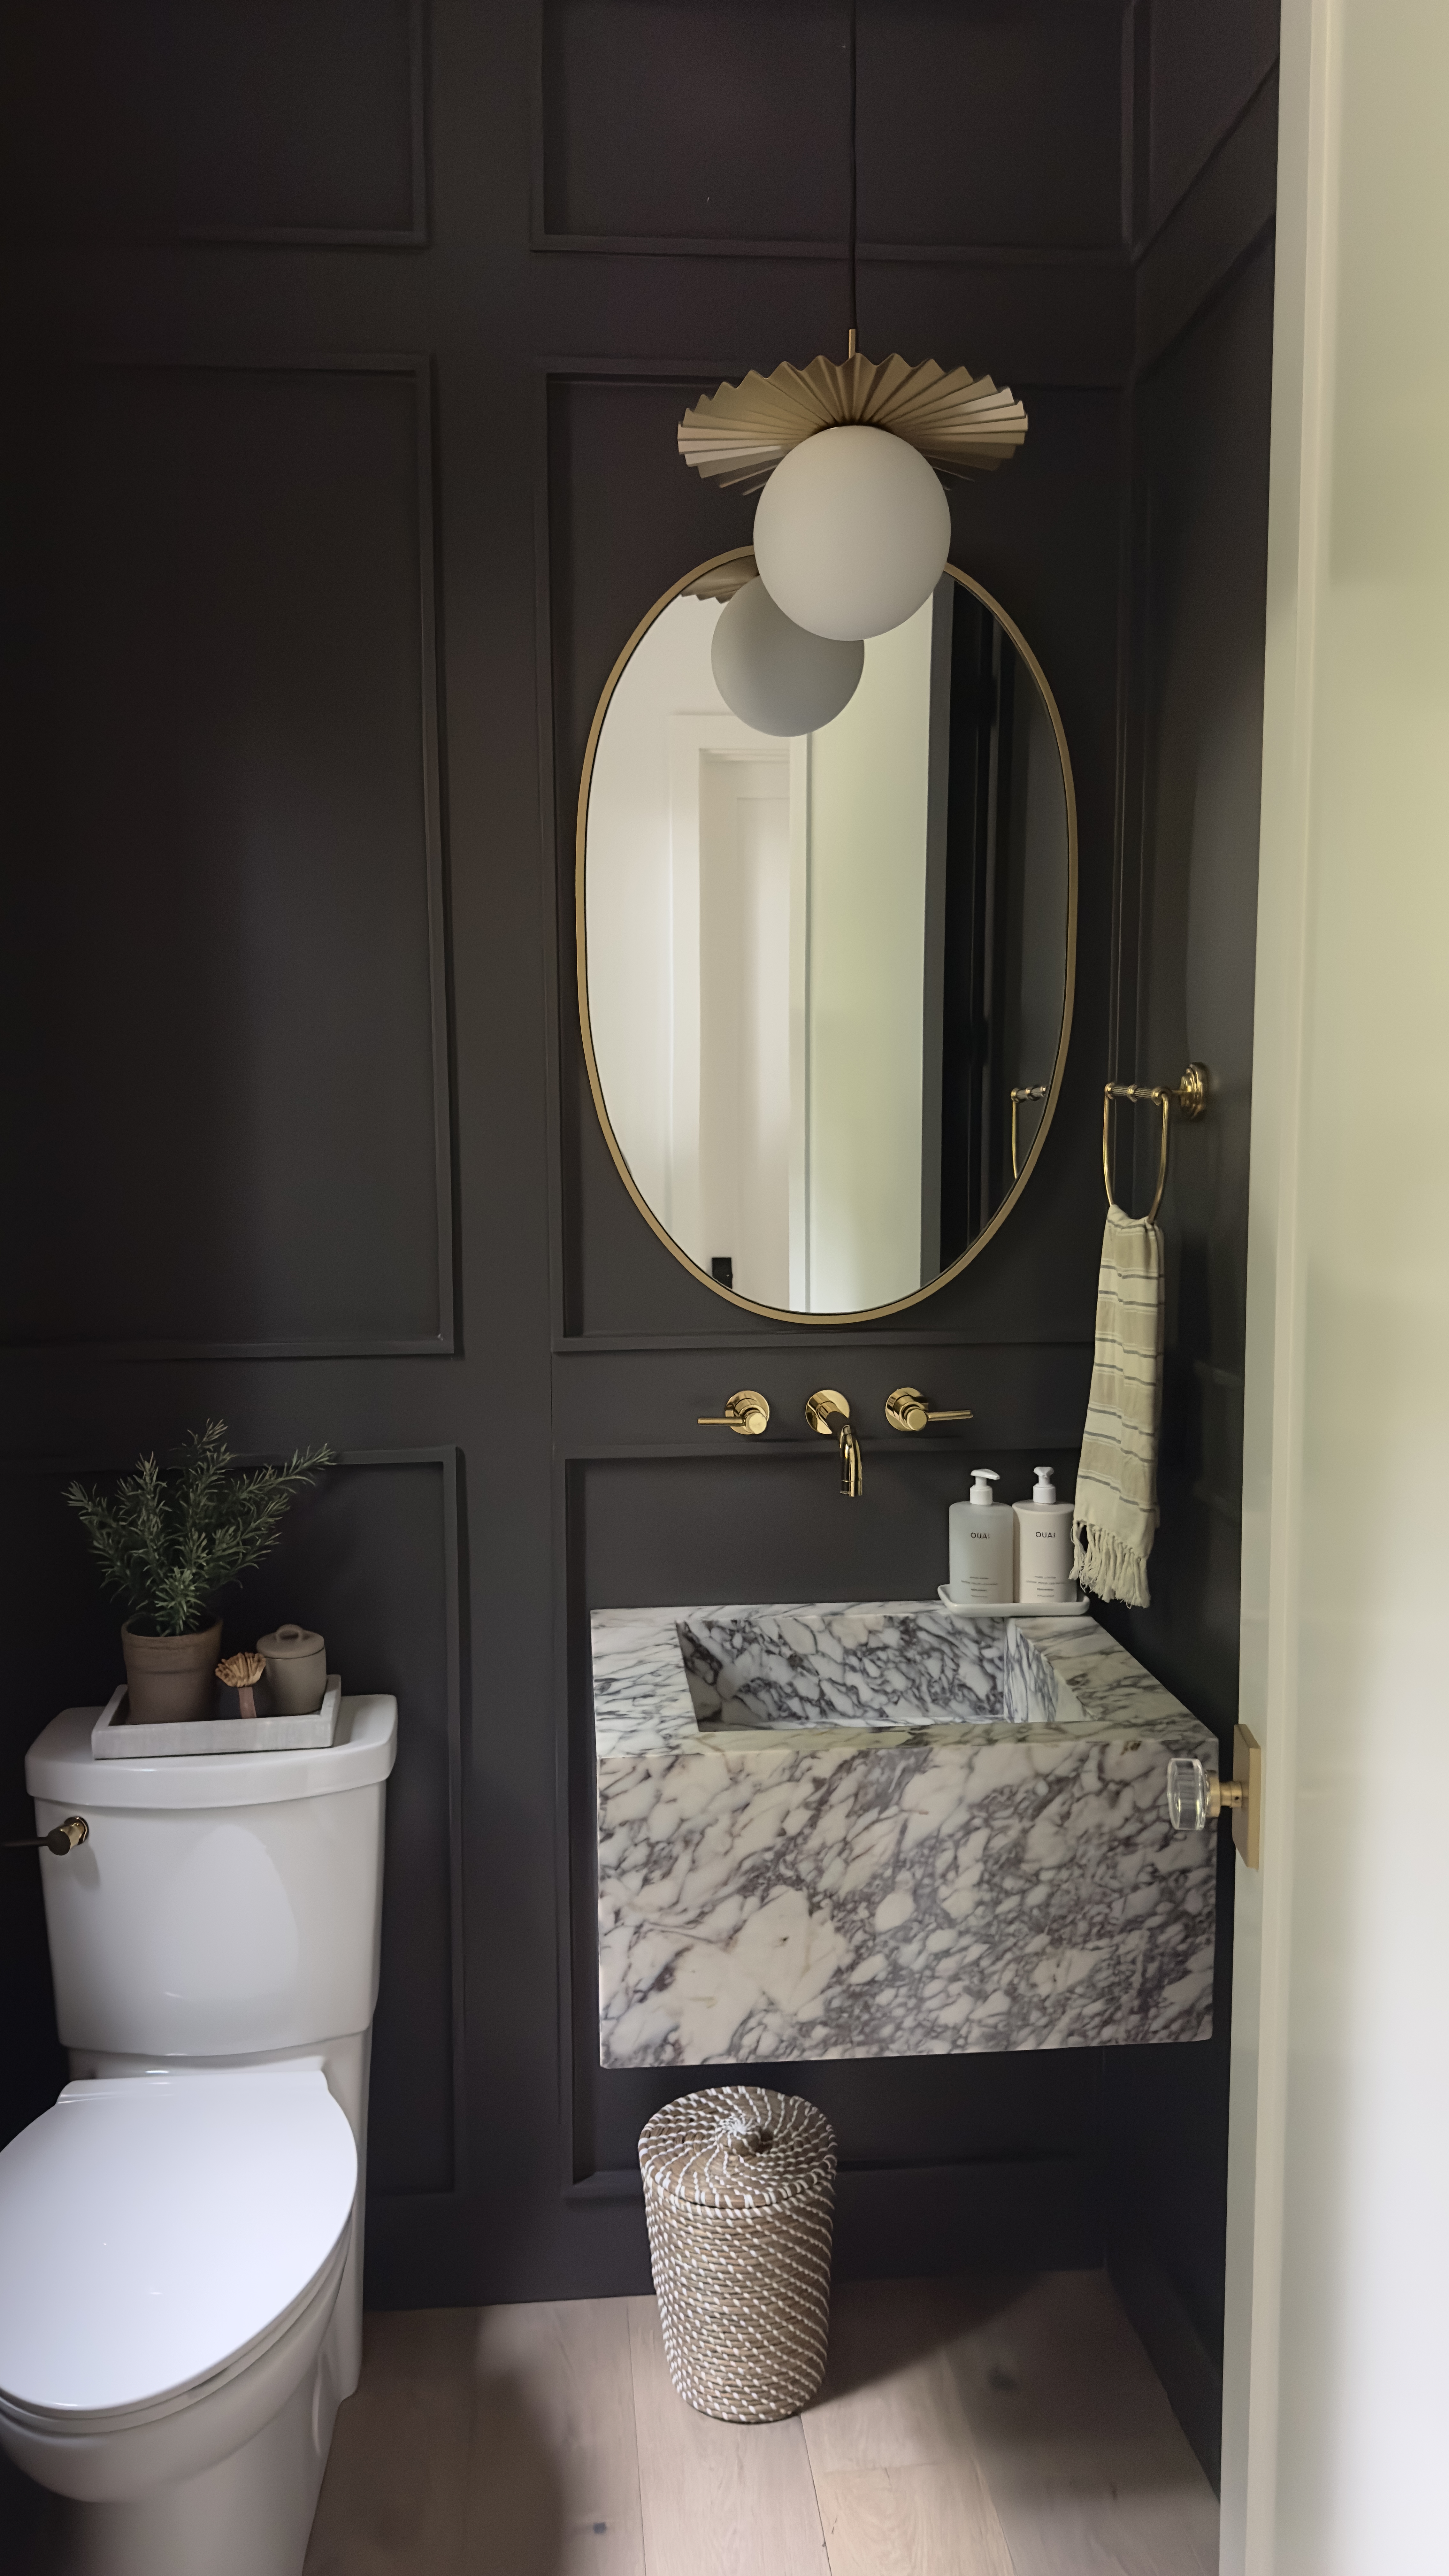 Dark Powder Room - Best Dark Paint Color For Small Rooms - Sherwin Williams Iron Ore - Marble Sink